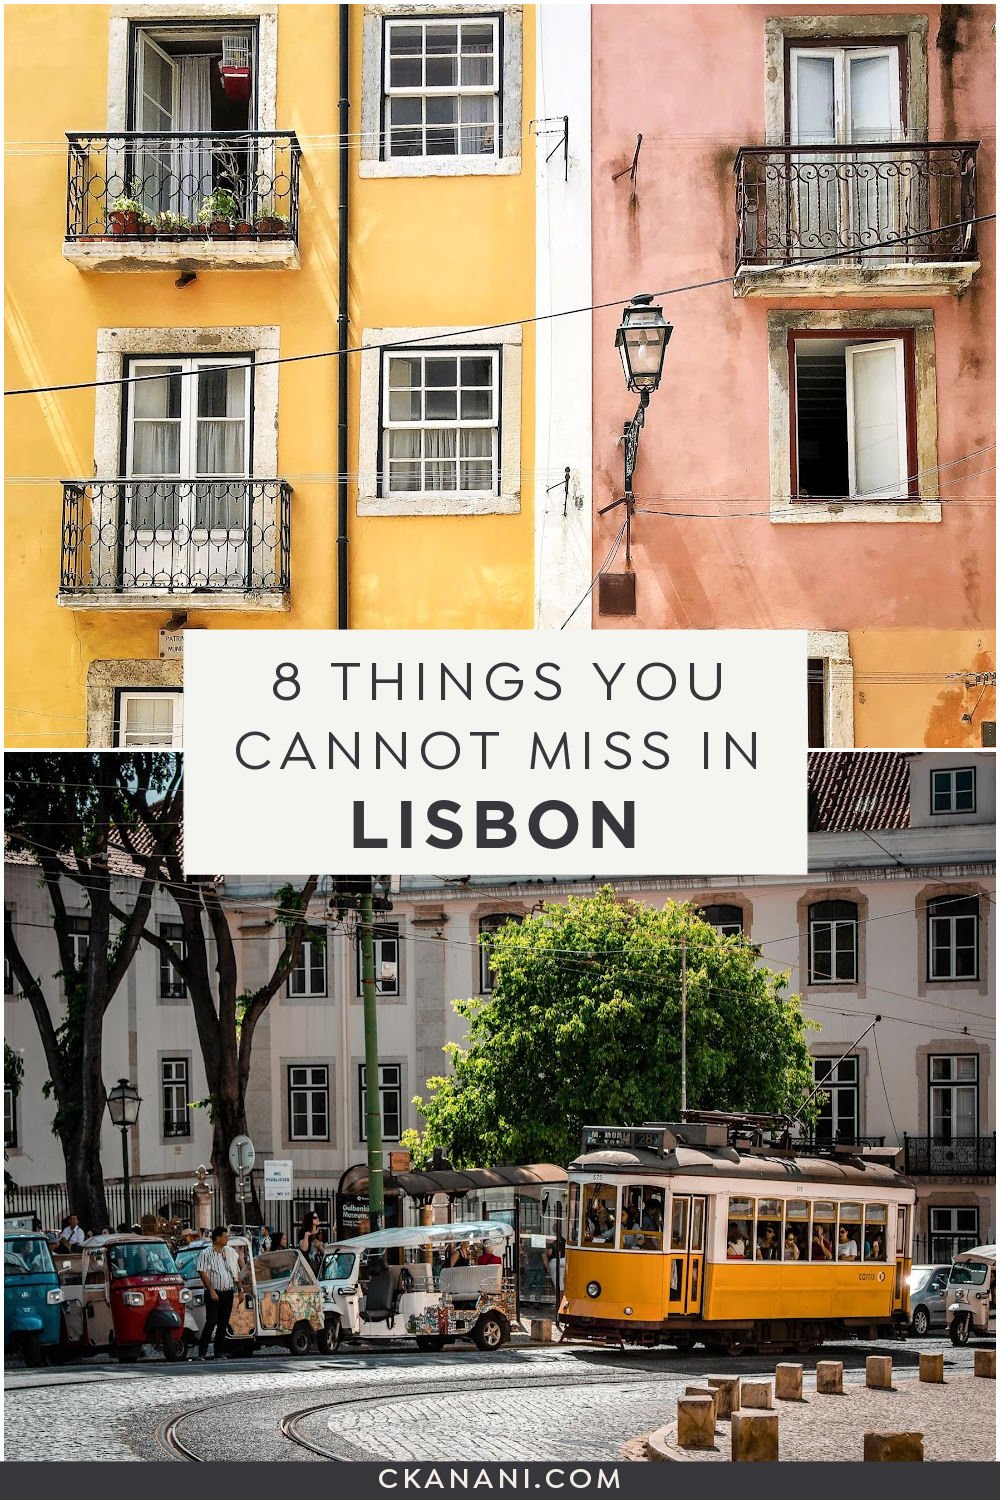 Lisbon itinerary things to see, do, eat, and drink! #travel #traveltips #europe #europetraveltips #lisbon #portugal Lisbon tips / things to do in Lisbon